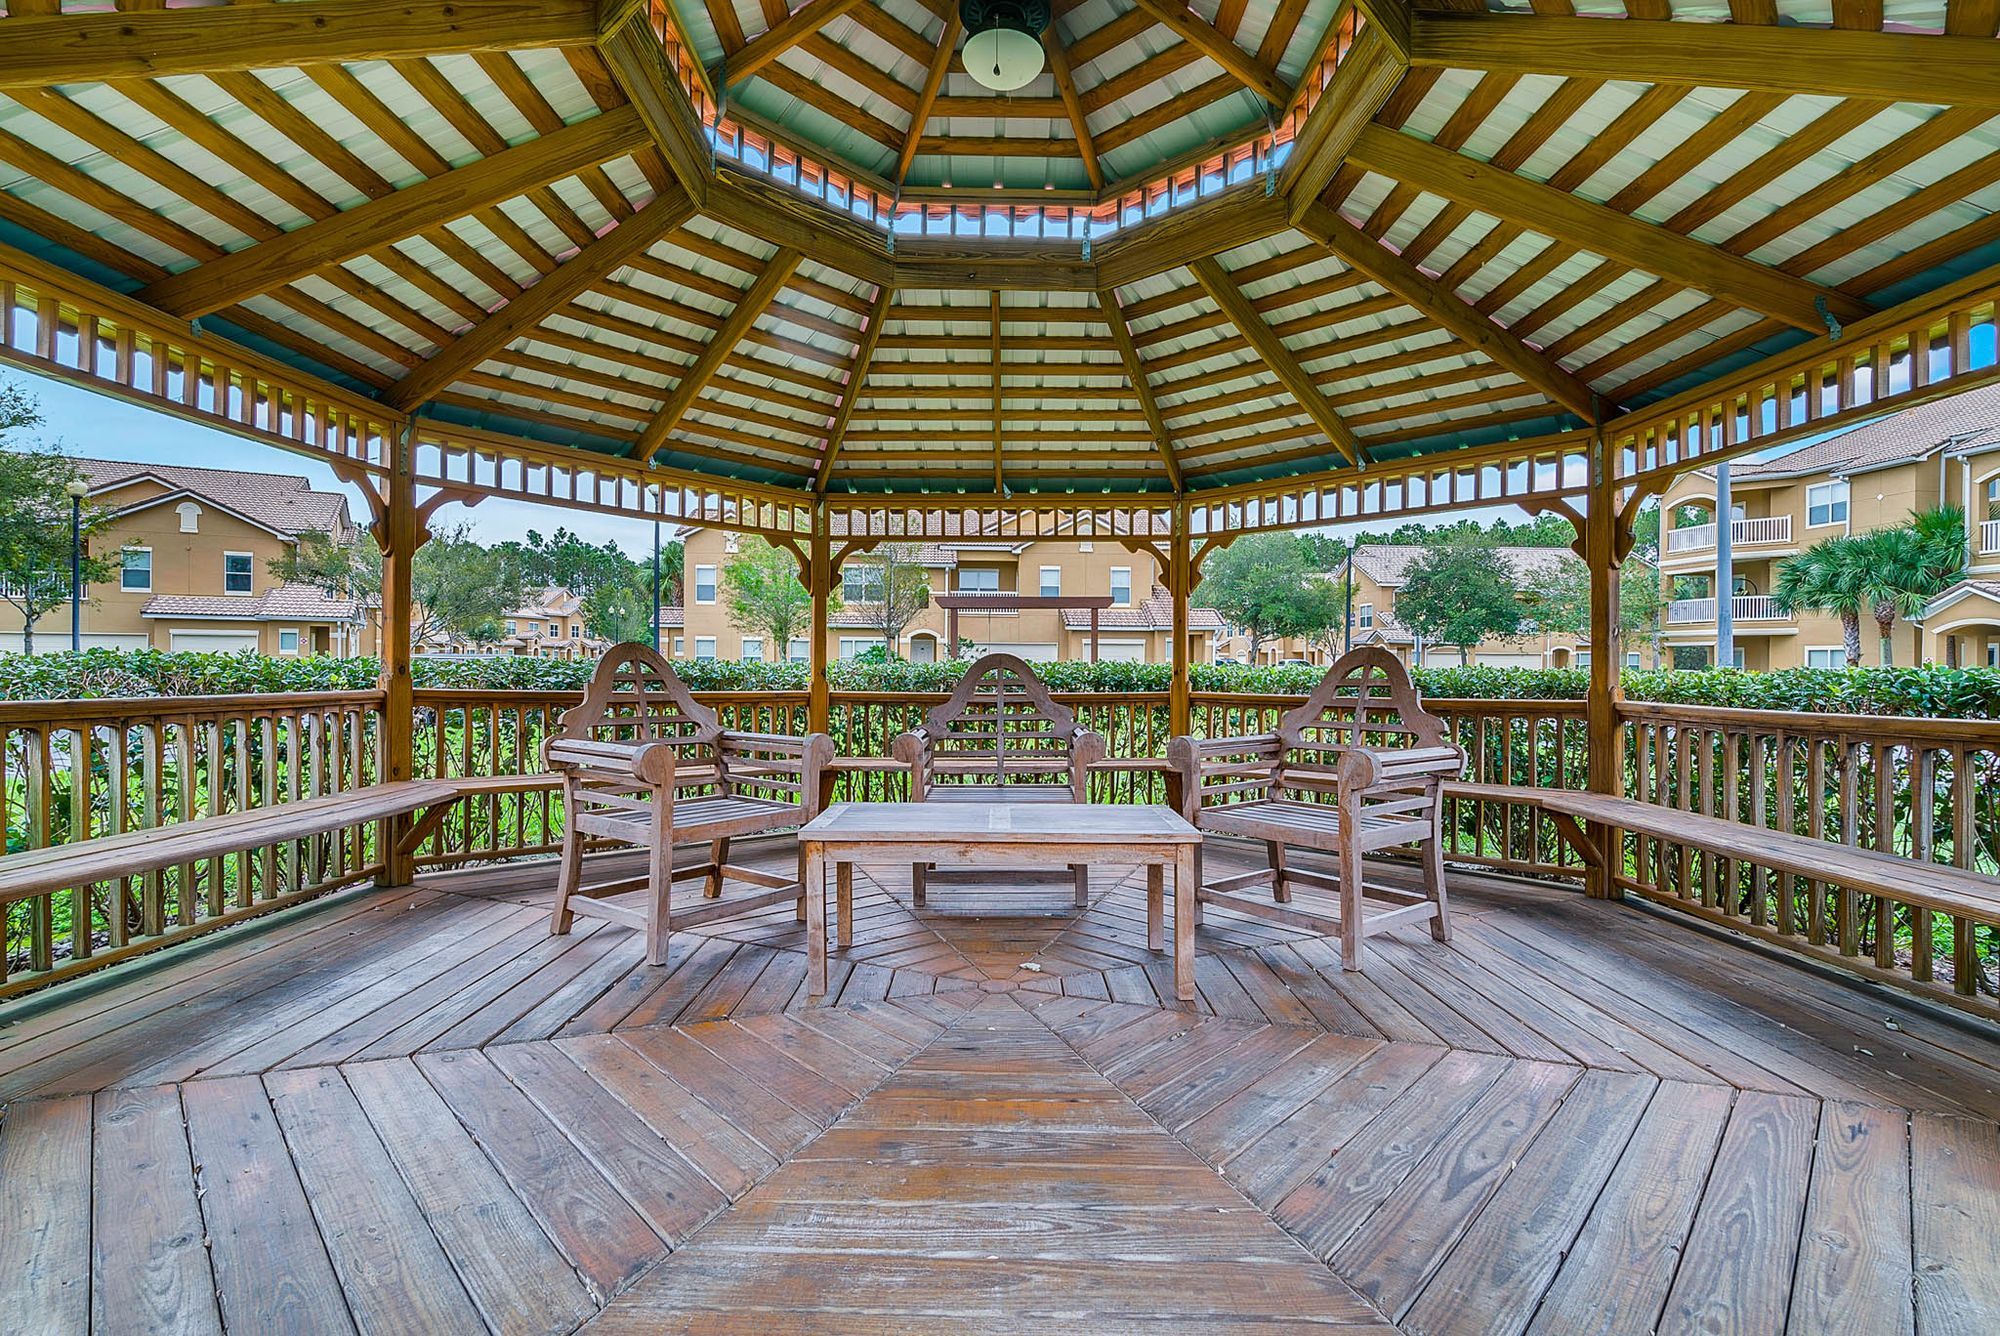 Gazebo with seating area